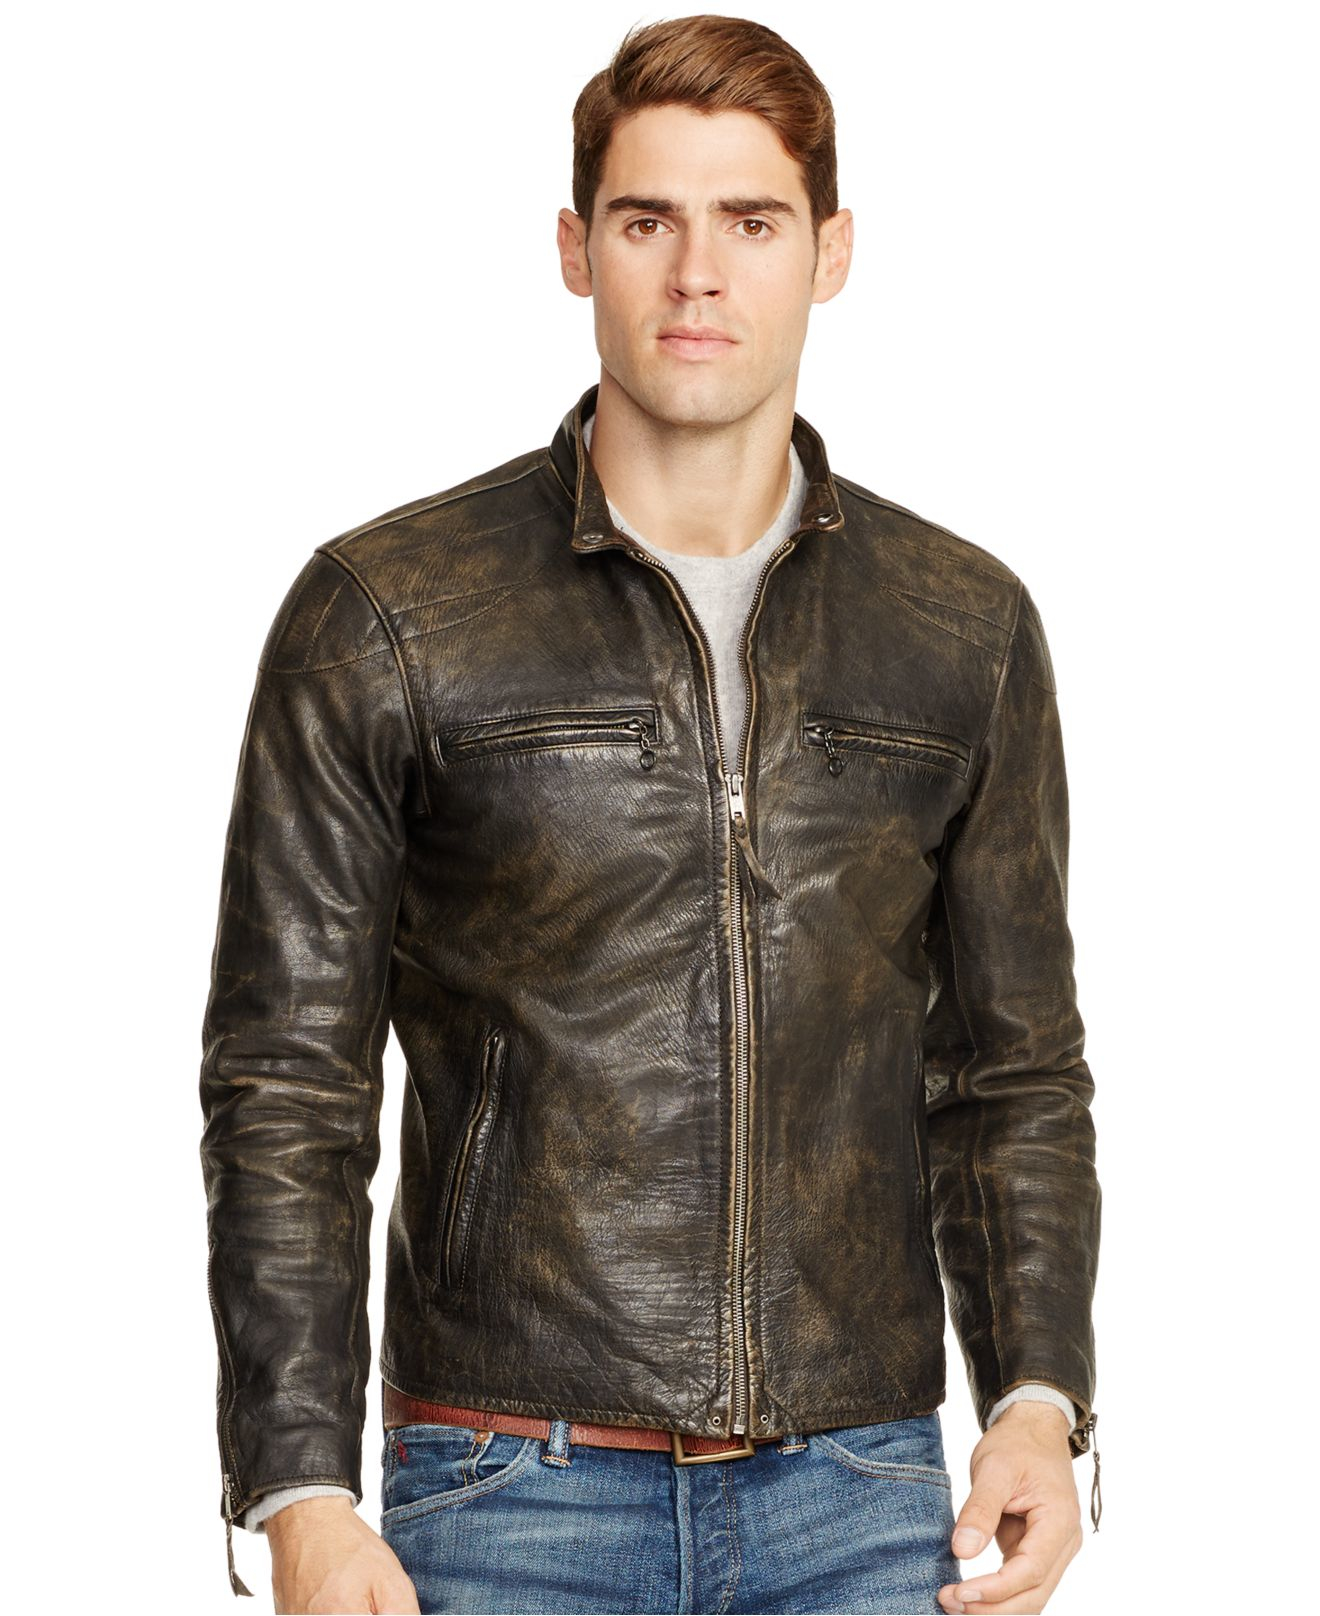 Lyst - Polo ralph lauren Distressed Leather Jacket in Brown for Men